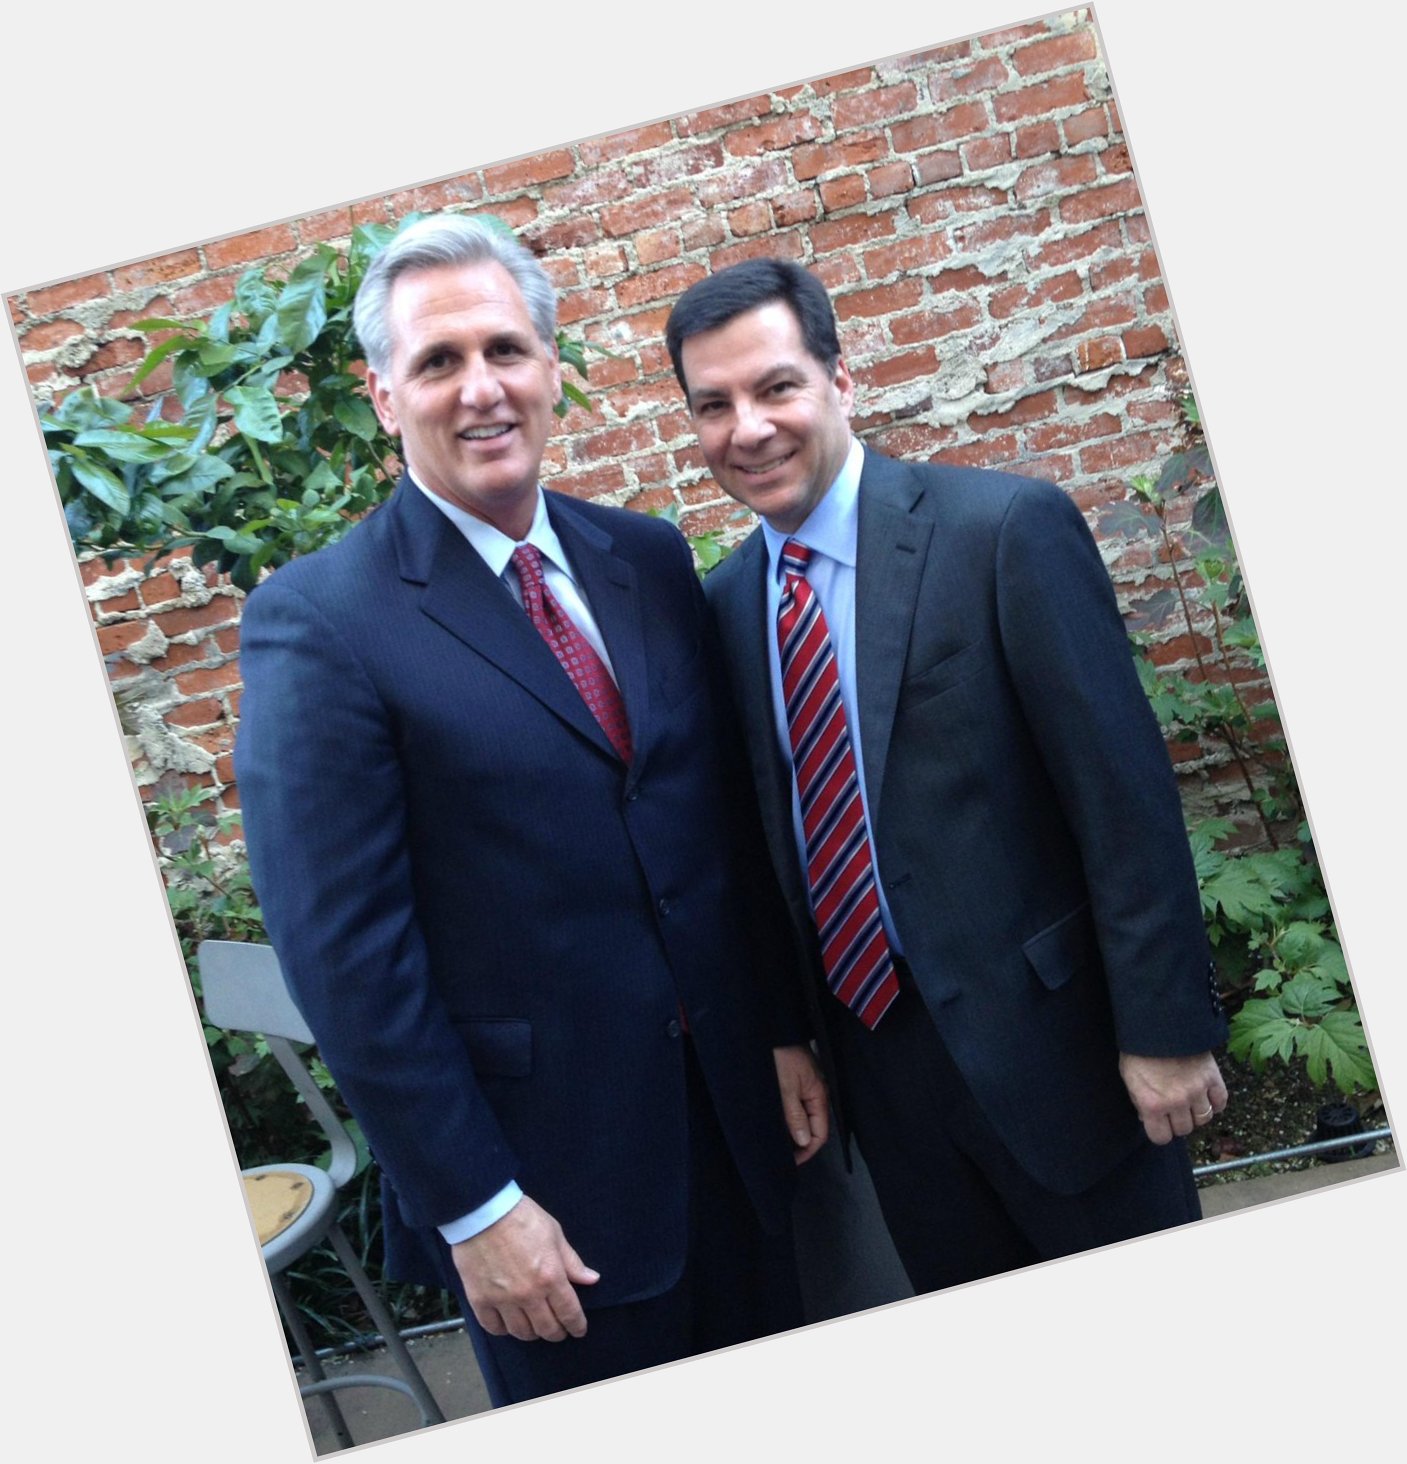 Wishing a very happy 50th birthday to our good friend & Majority Leader Kevin McCarthy 